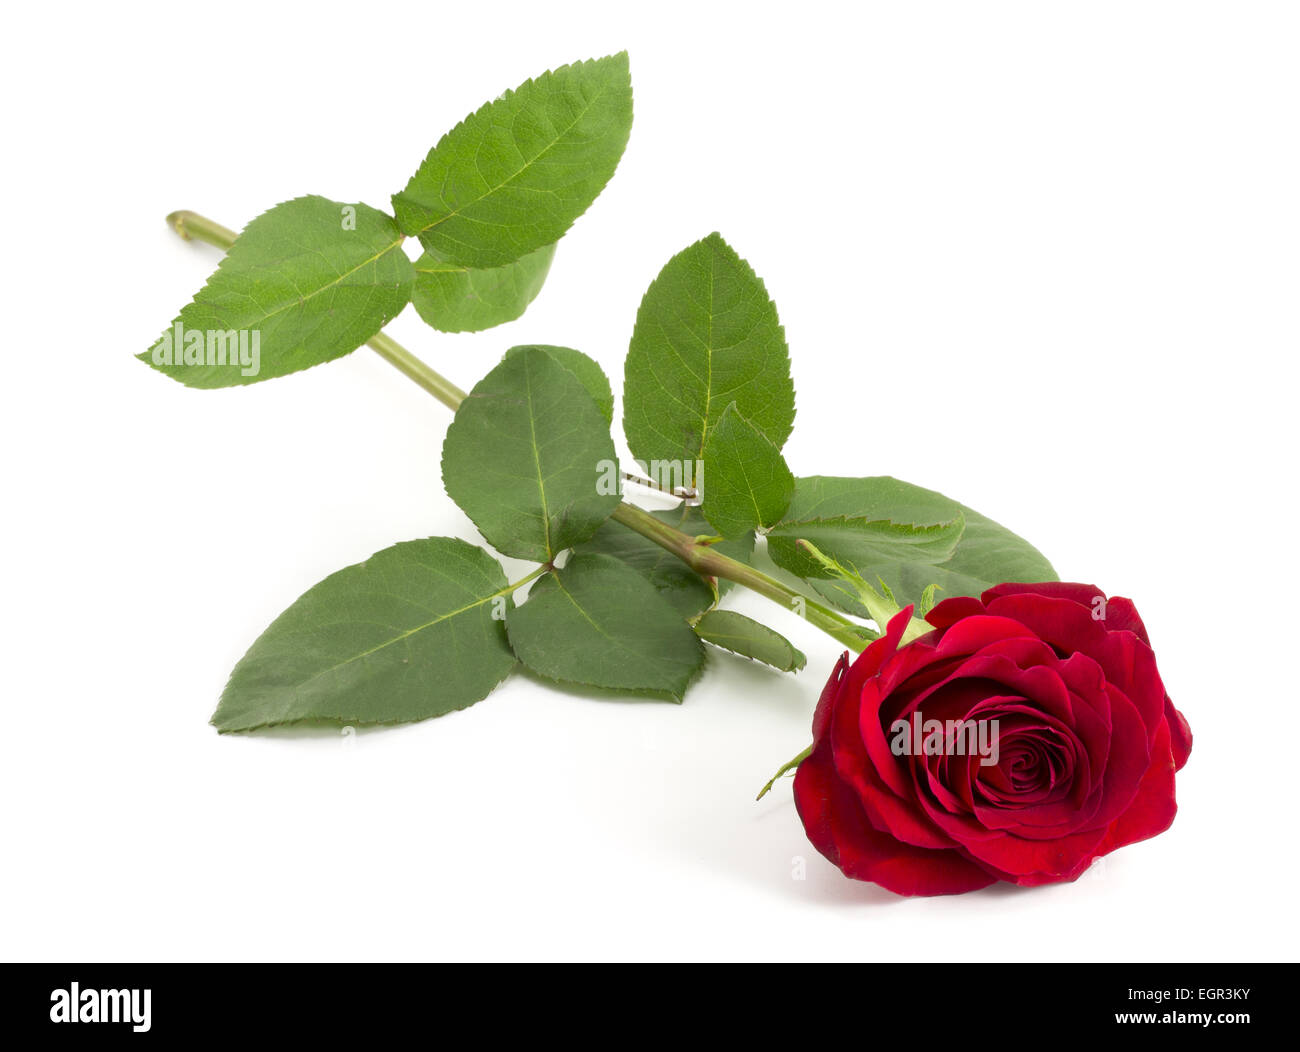 red rose bud on a long green stem Stock Photo